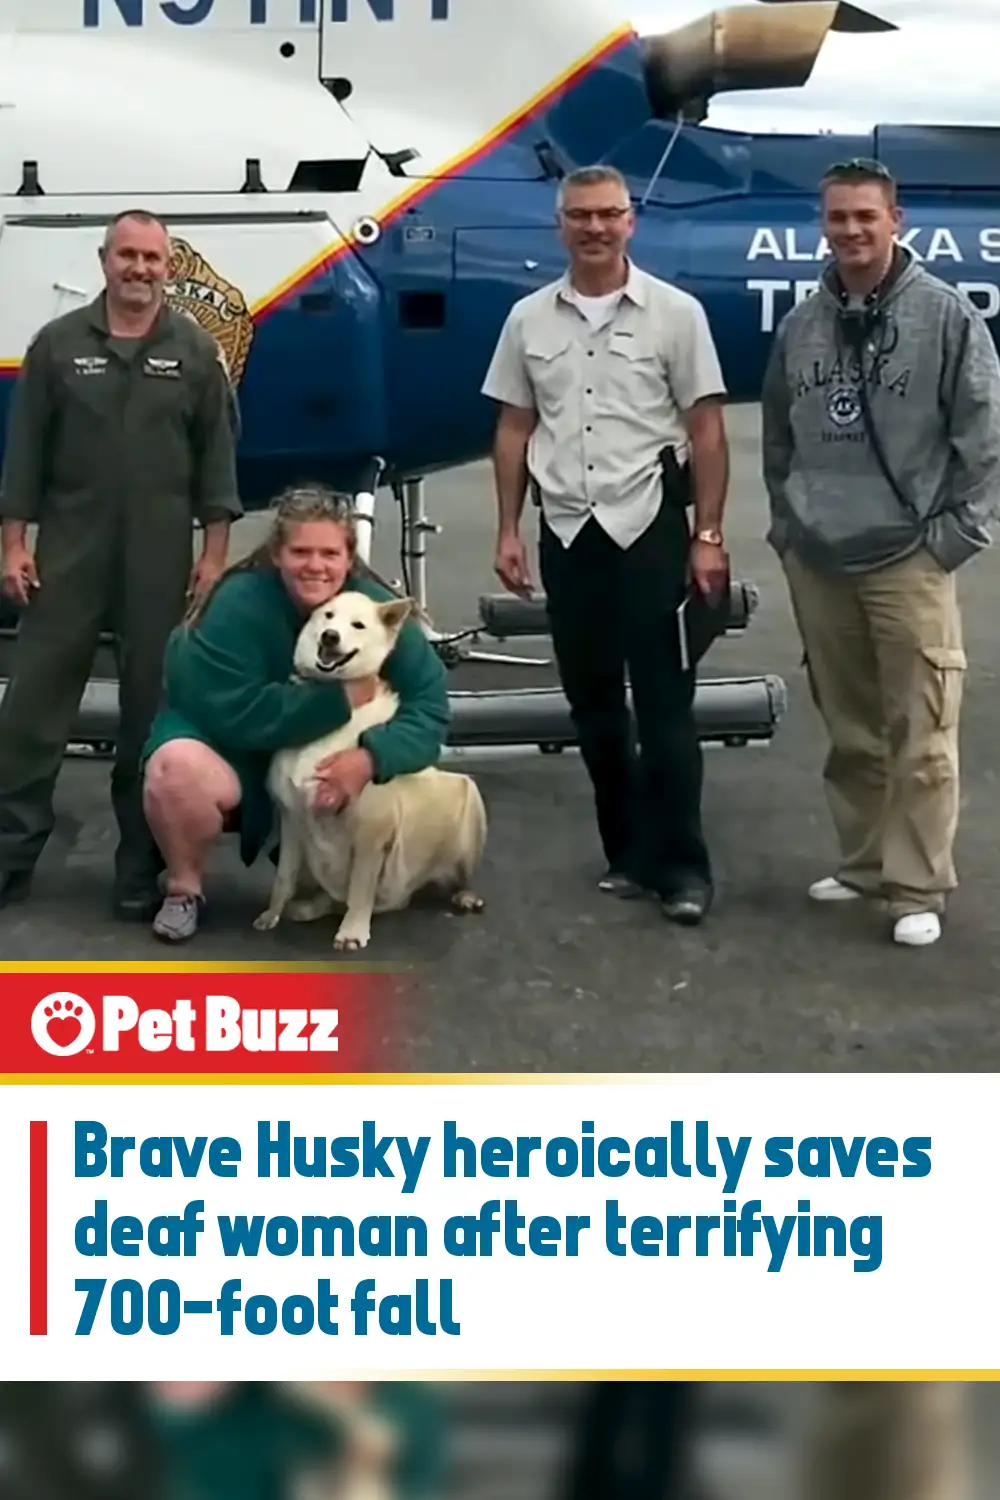 Brave Husky heroically saves deaf woman after terrifying 700-foot fall